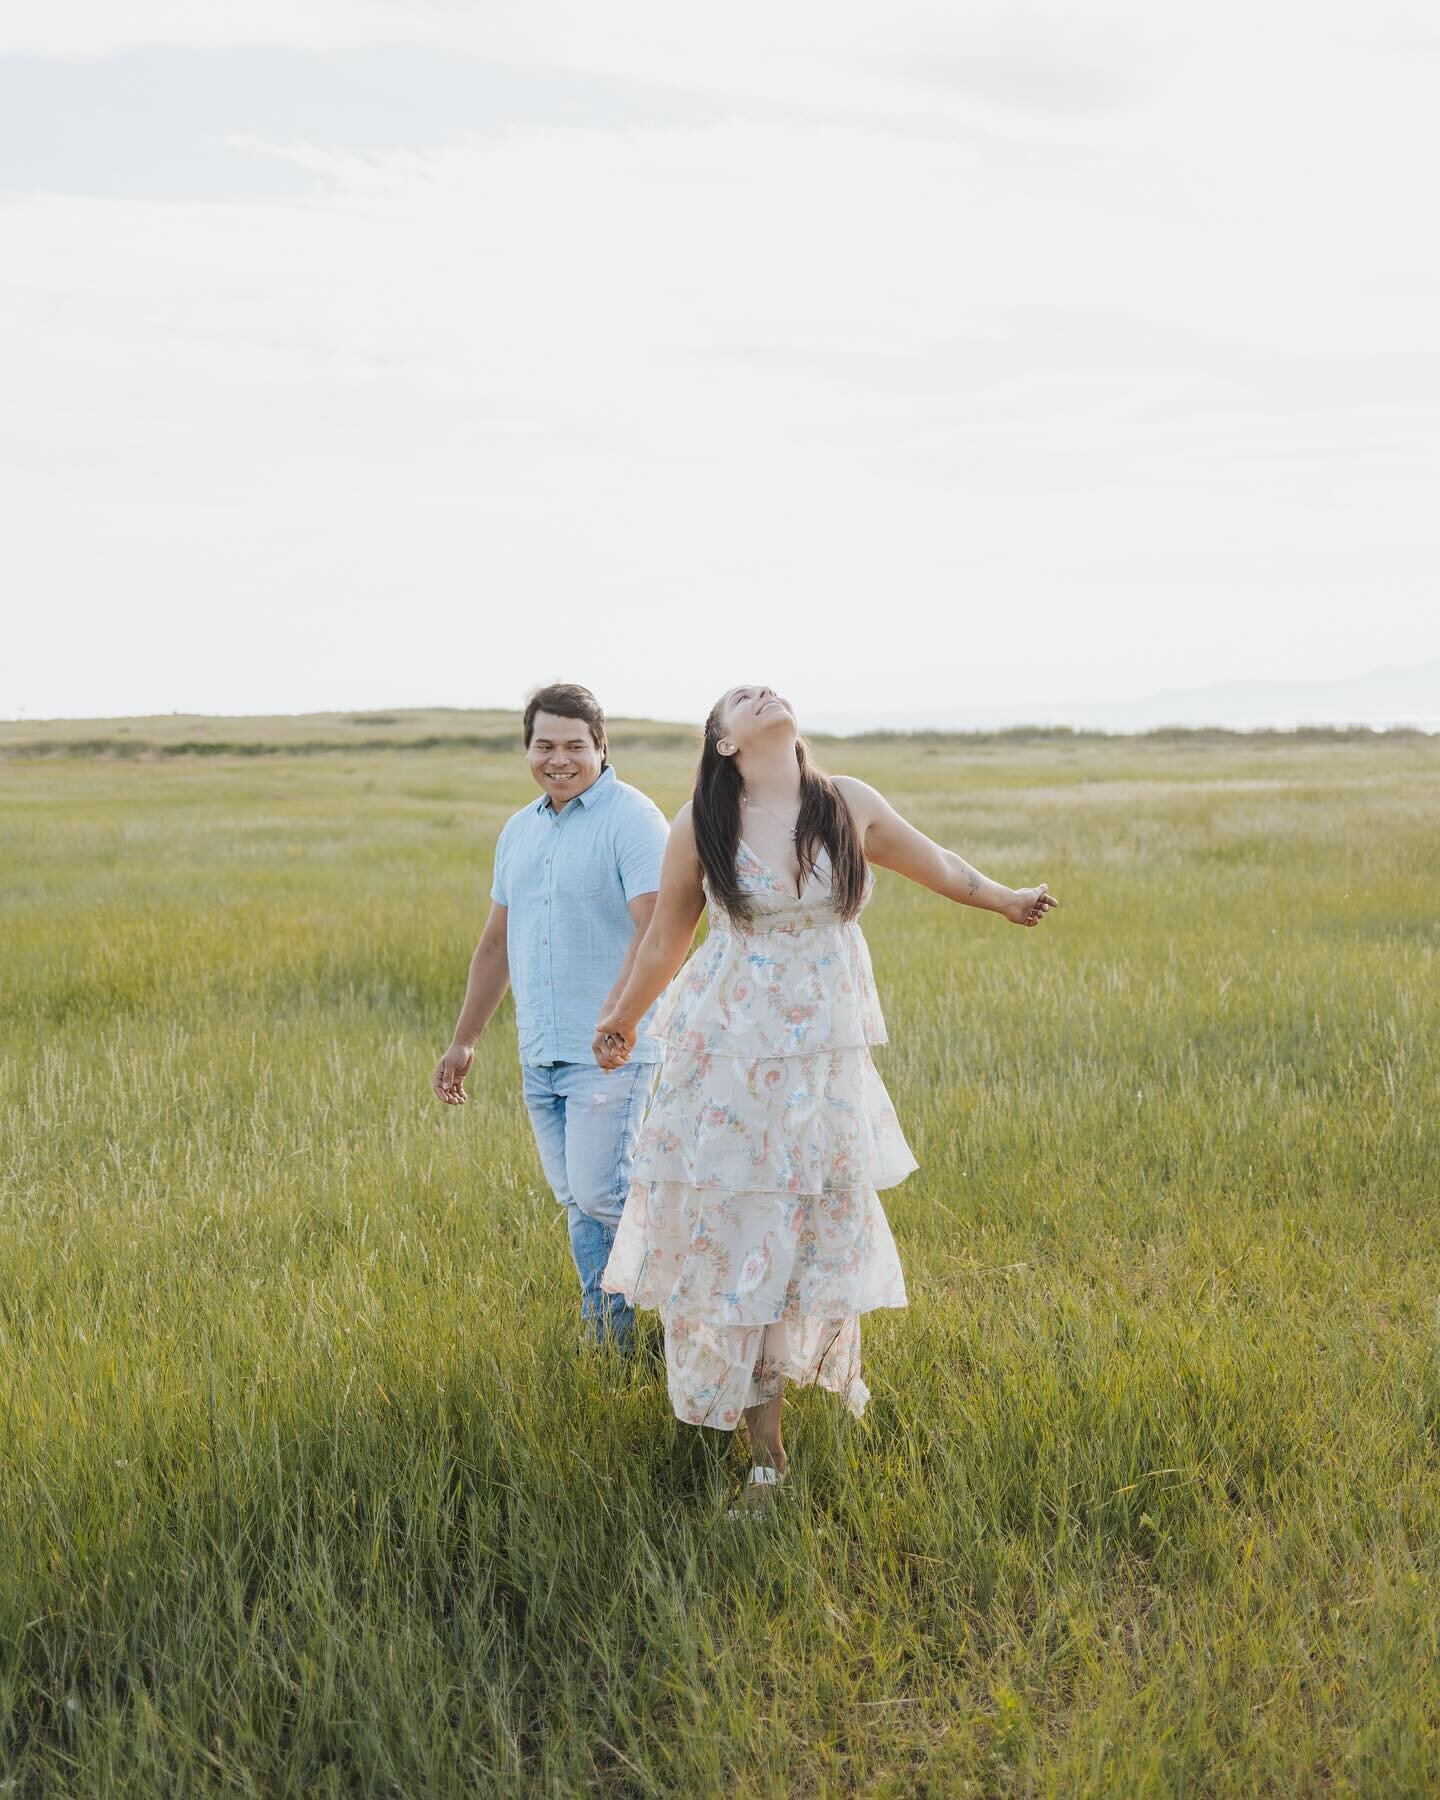 Spring is tomorrowwwww!!! 🌸 so excited for this warm weather 
.
.
.
.
.
#slcweddingphotographer #utahengagements #draperphotographer #oremphotographer 
#parkcityphotographer #utahvalleyphotographer #southjordanphotographer #slcphotographer #saltlake